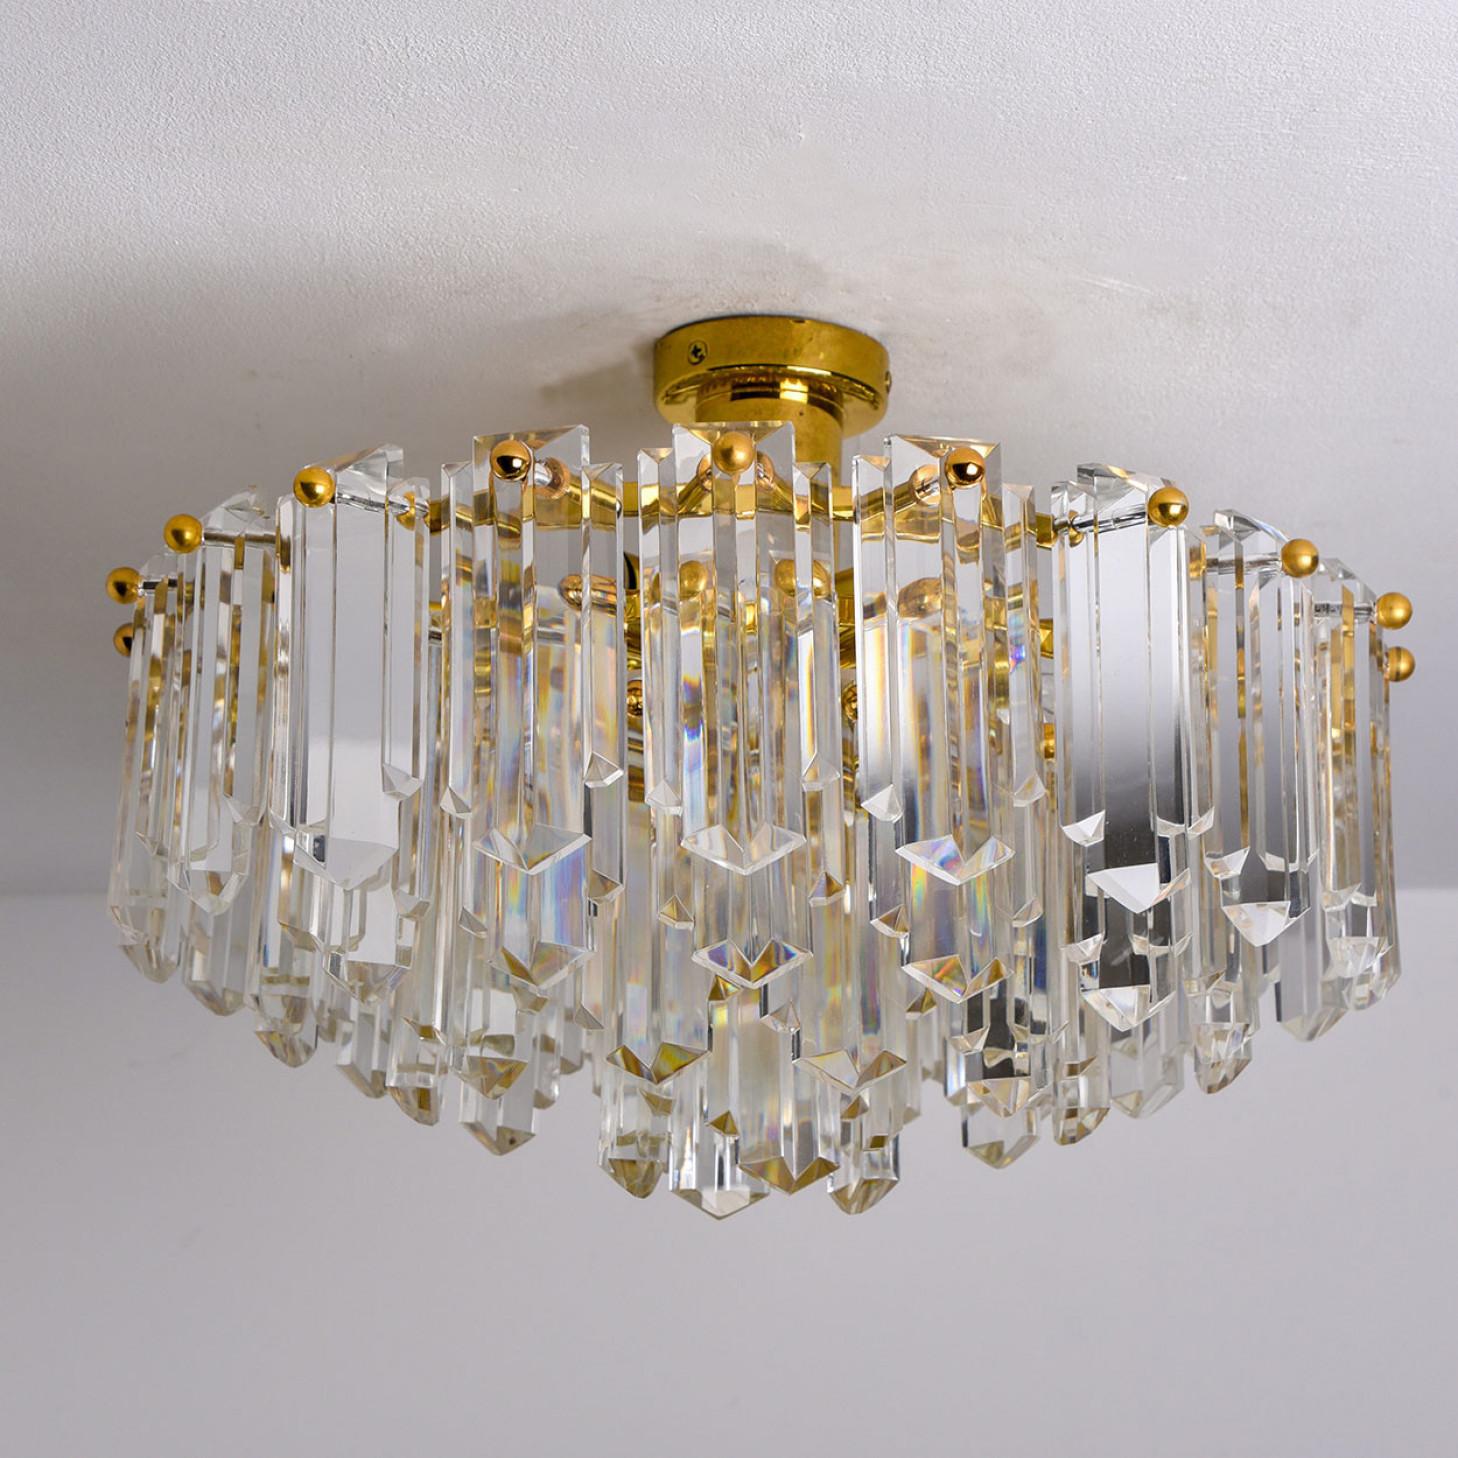 1 of the 2 Beautiful brass and clear brilliant glass light fixtures by J.T. Kalmar, Vienna, Austria, manufactured in circa 1970 (late 1960s and early 1970s). High end piece. Beautiful craftsmanship from the 20th century.

Three layers of large